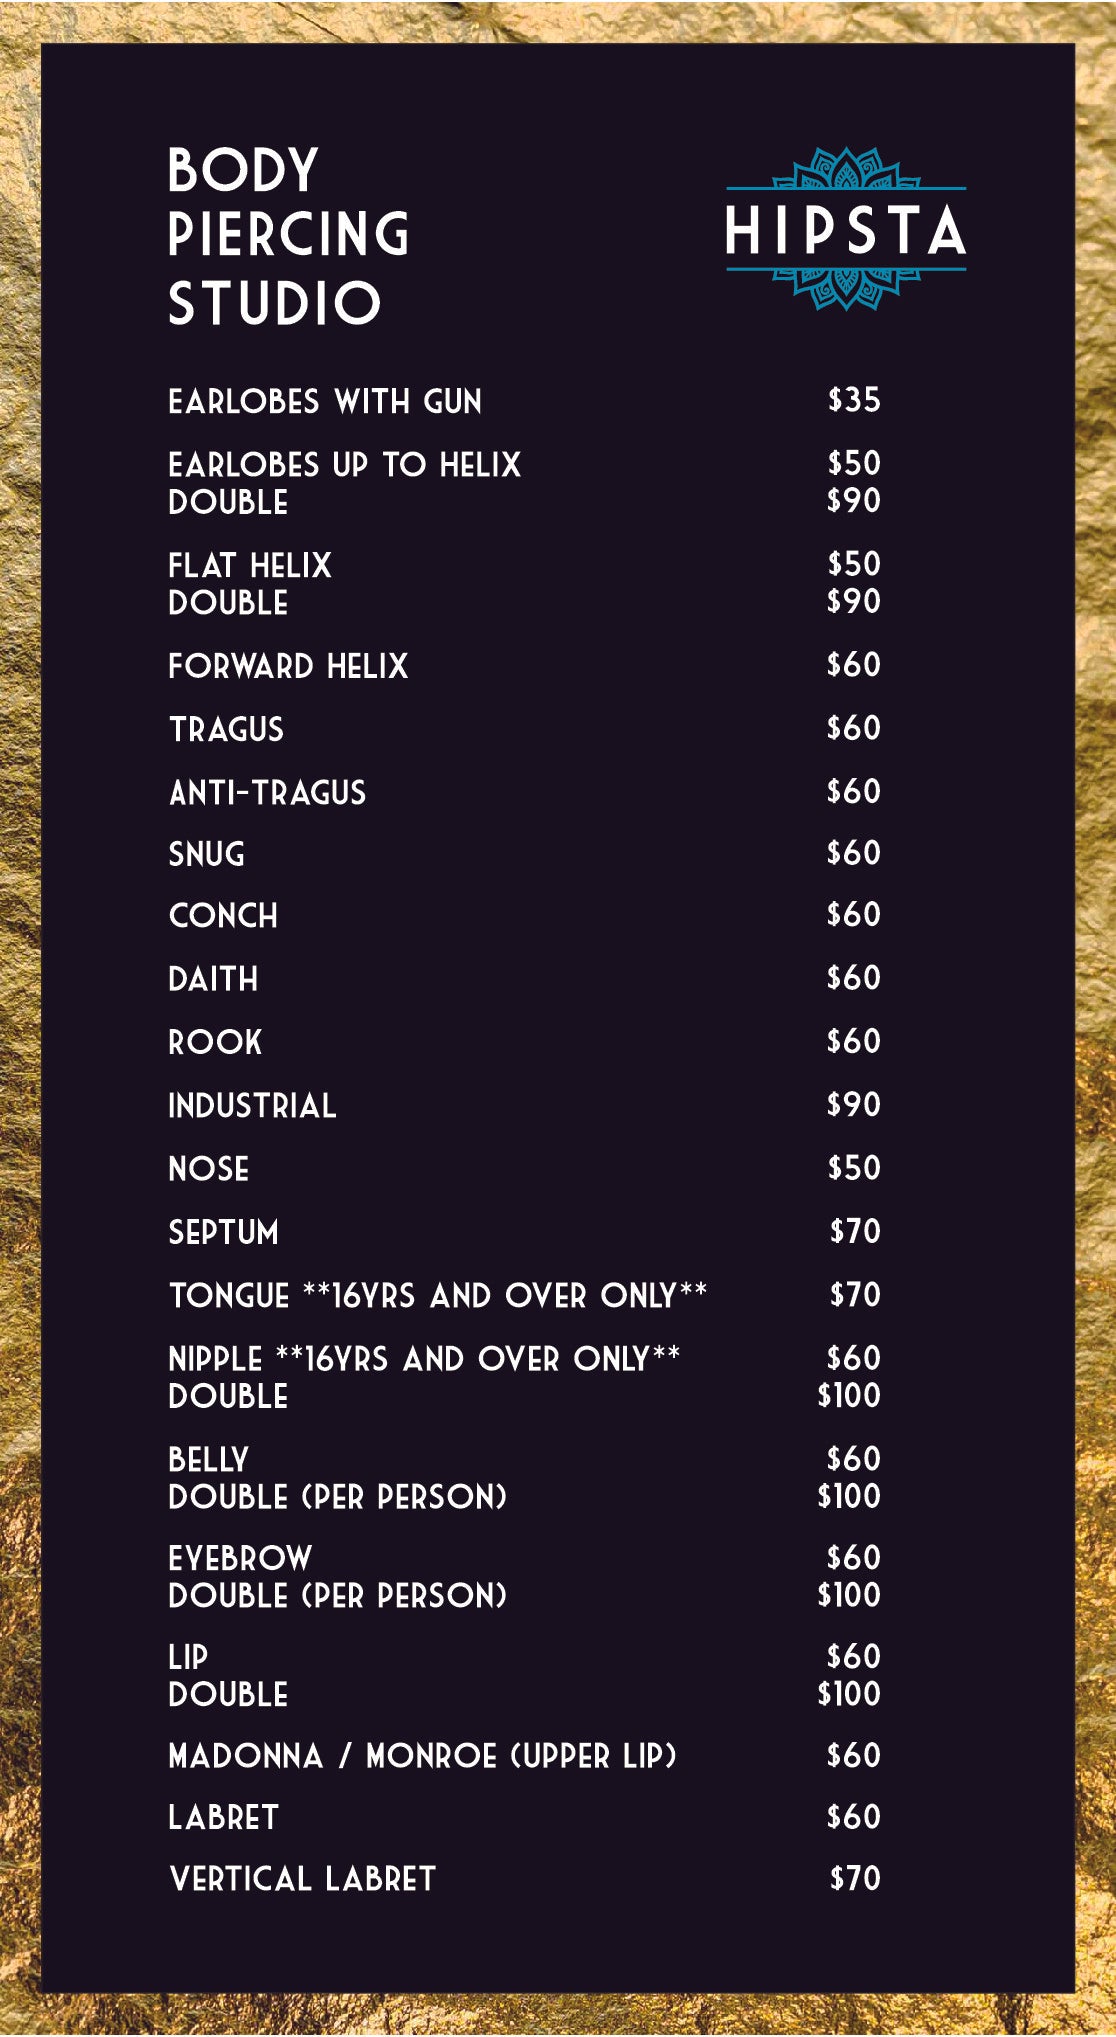 Pricing chart for piercings